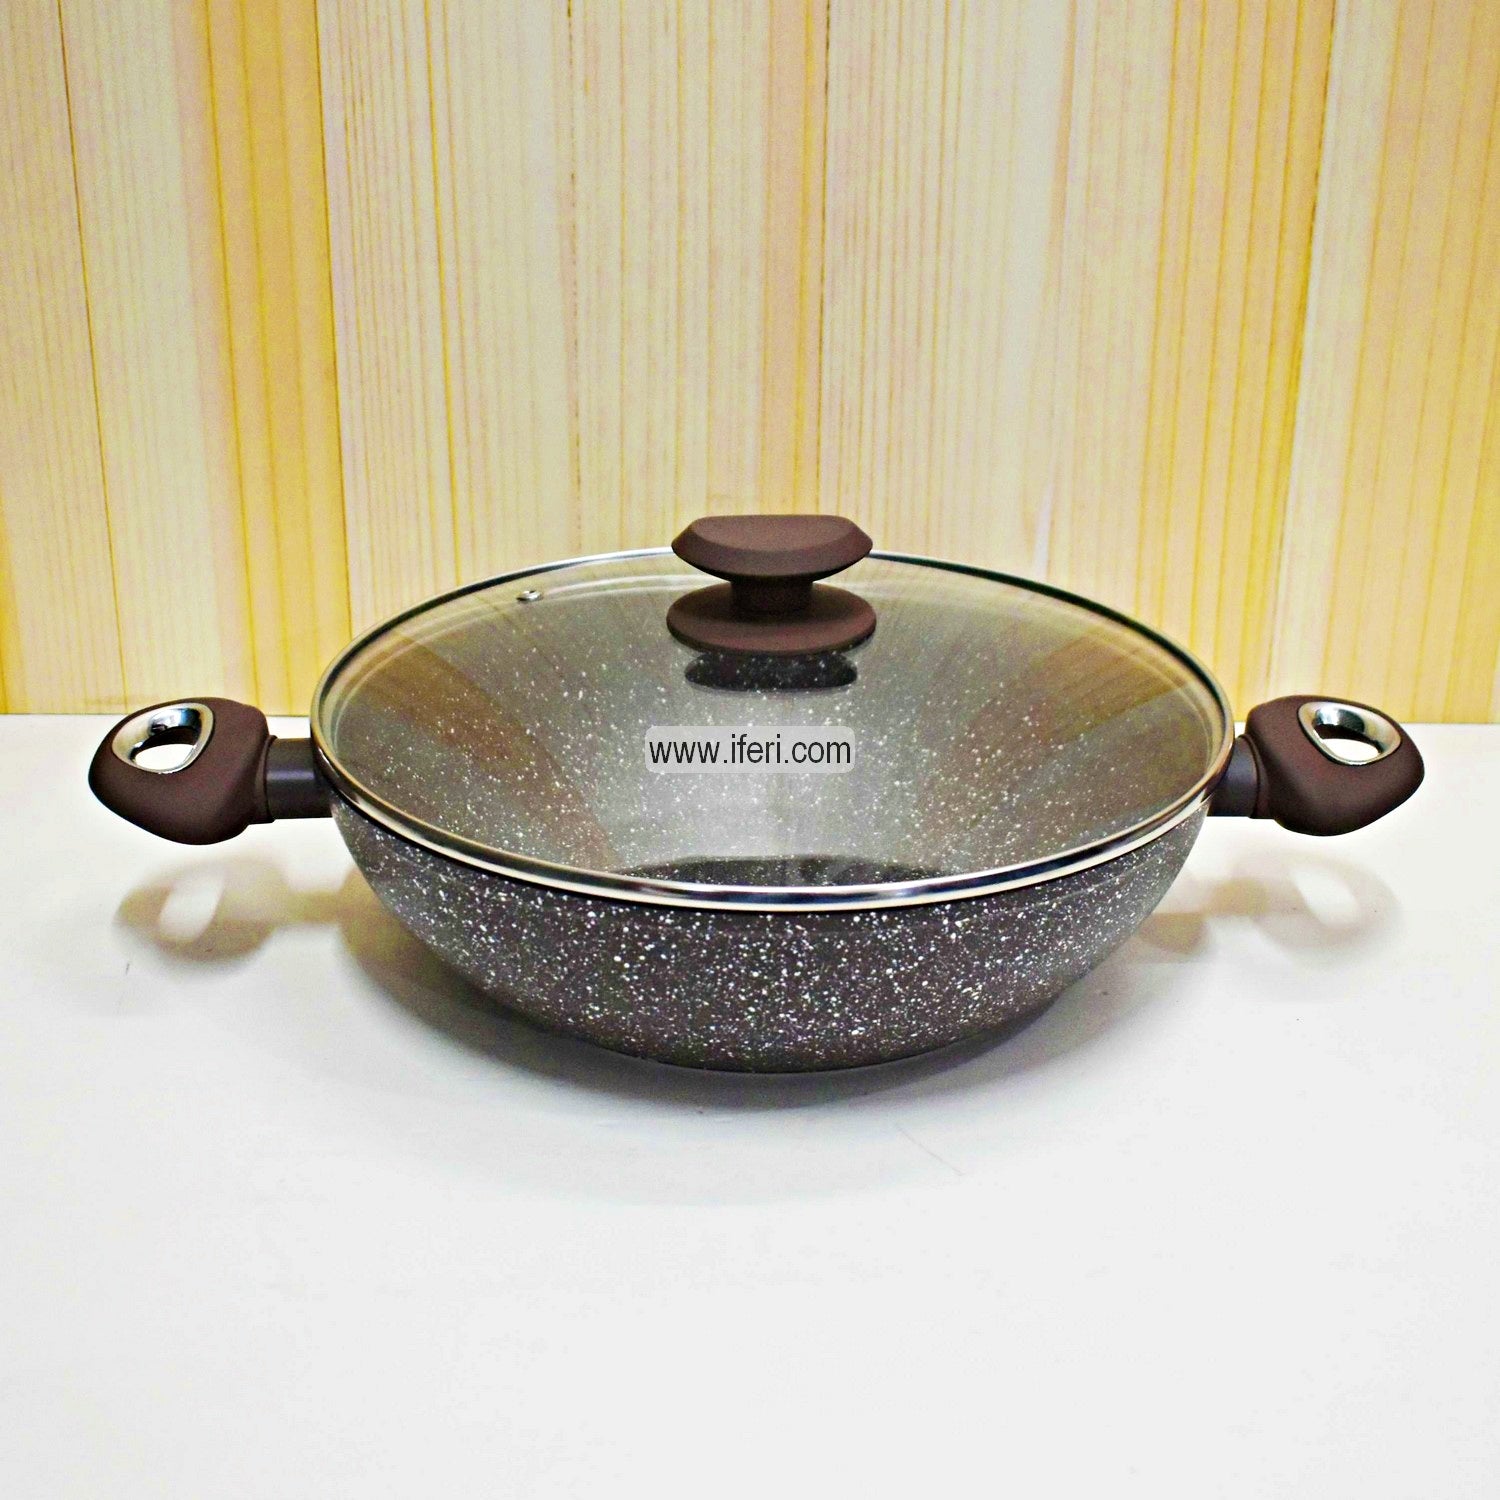 28 cm Maistic Non-Stick Cookware with Lid TG0749